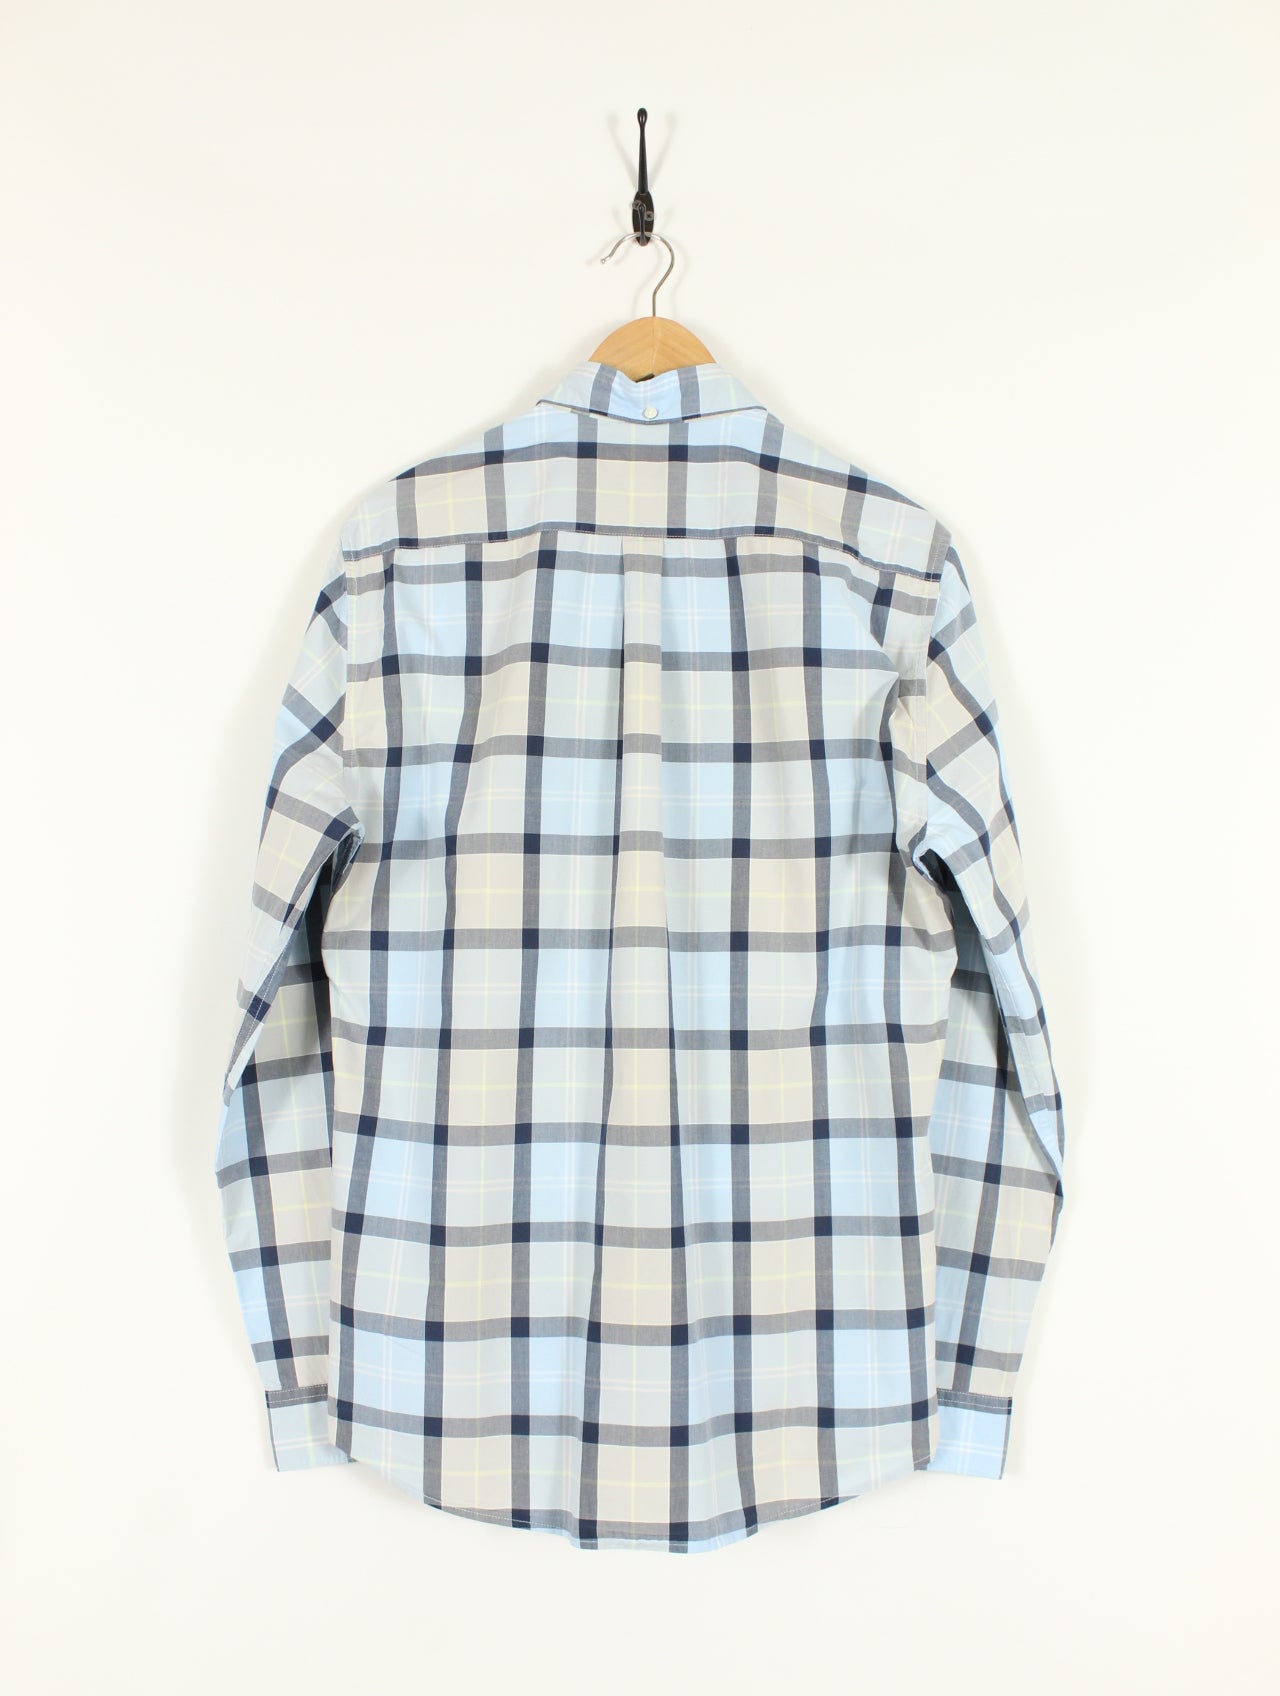 Barbour Checked Shirt (L)